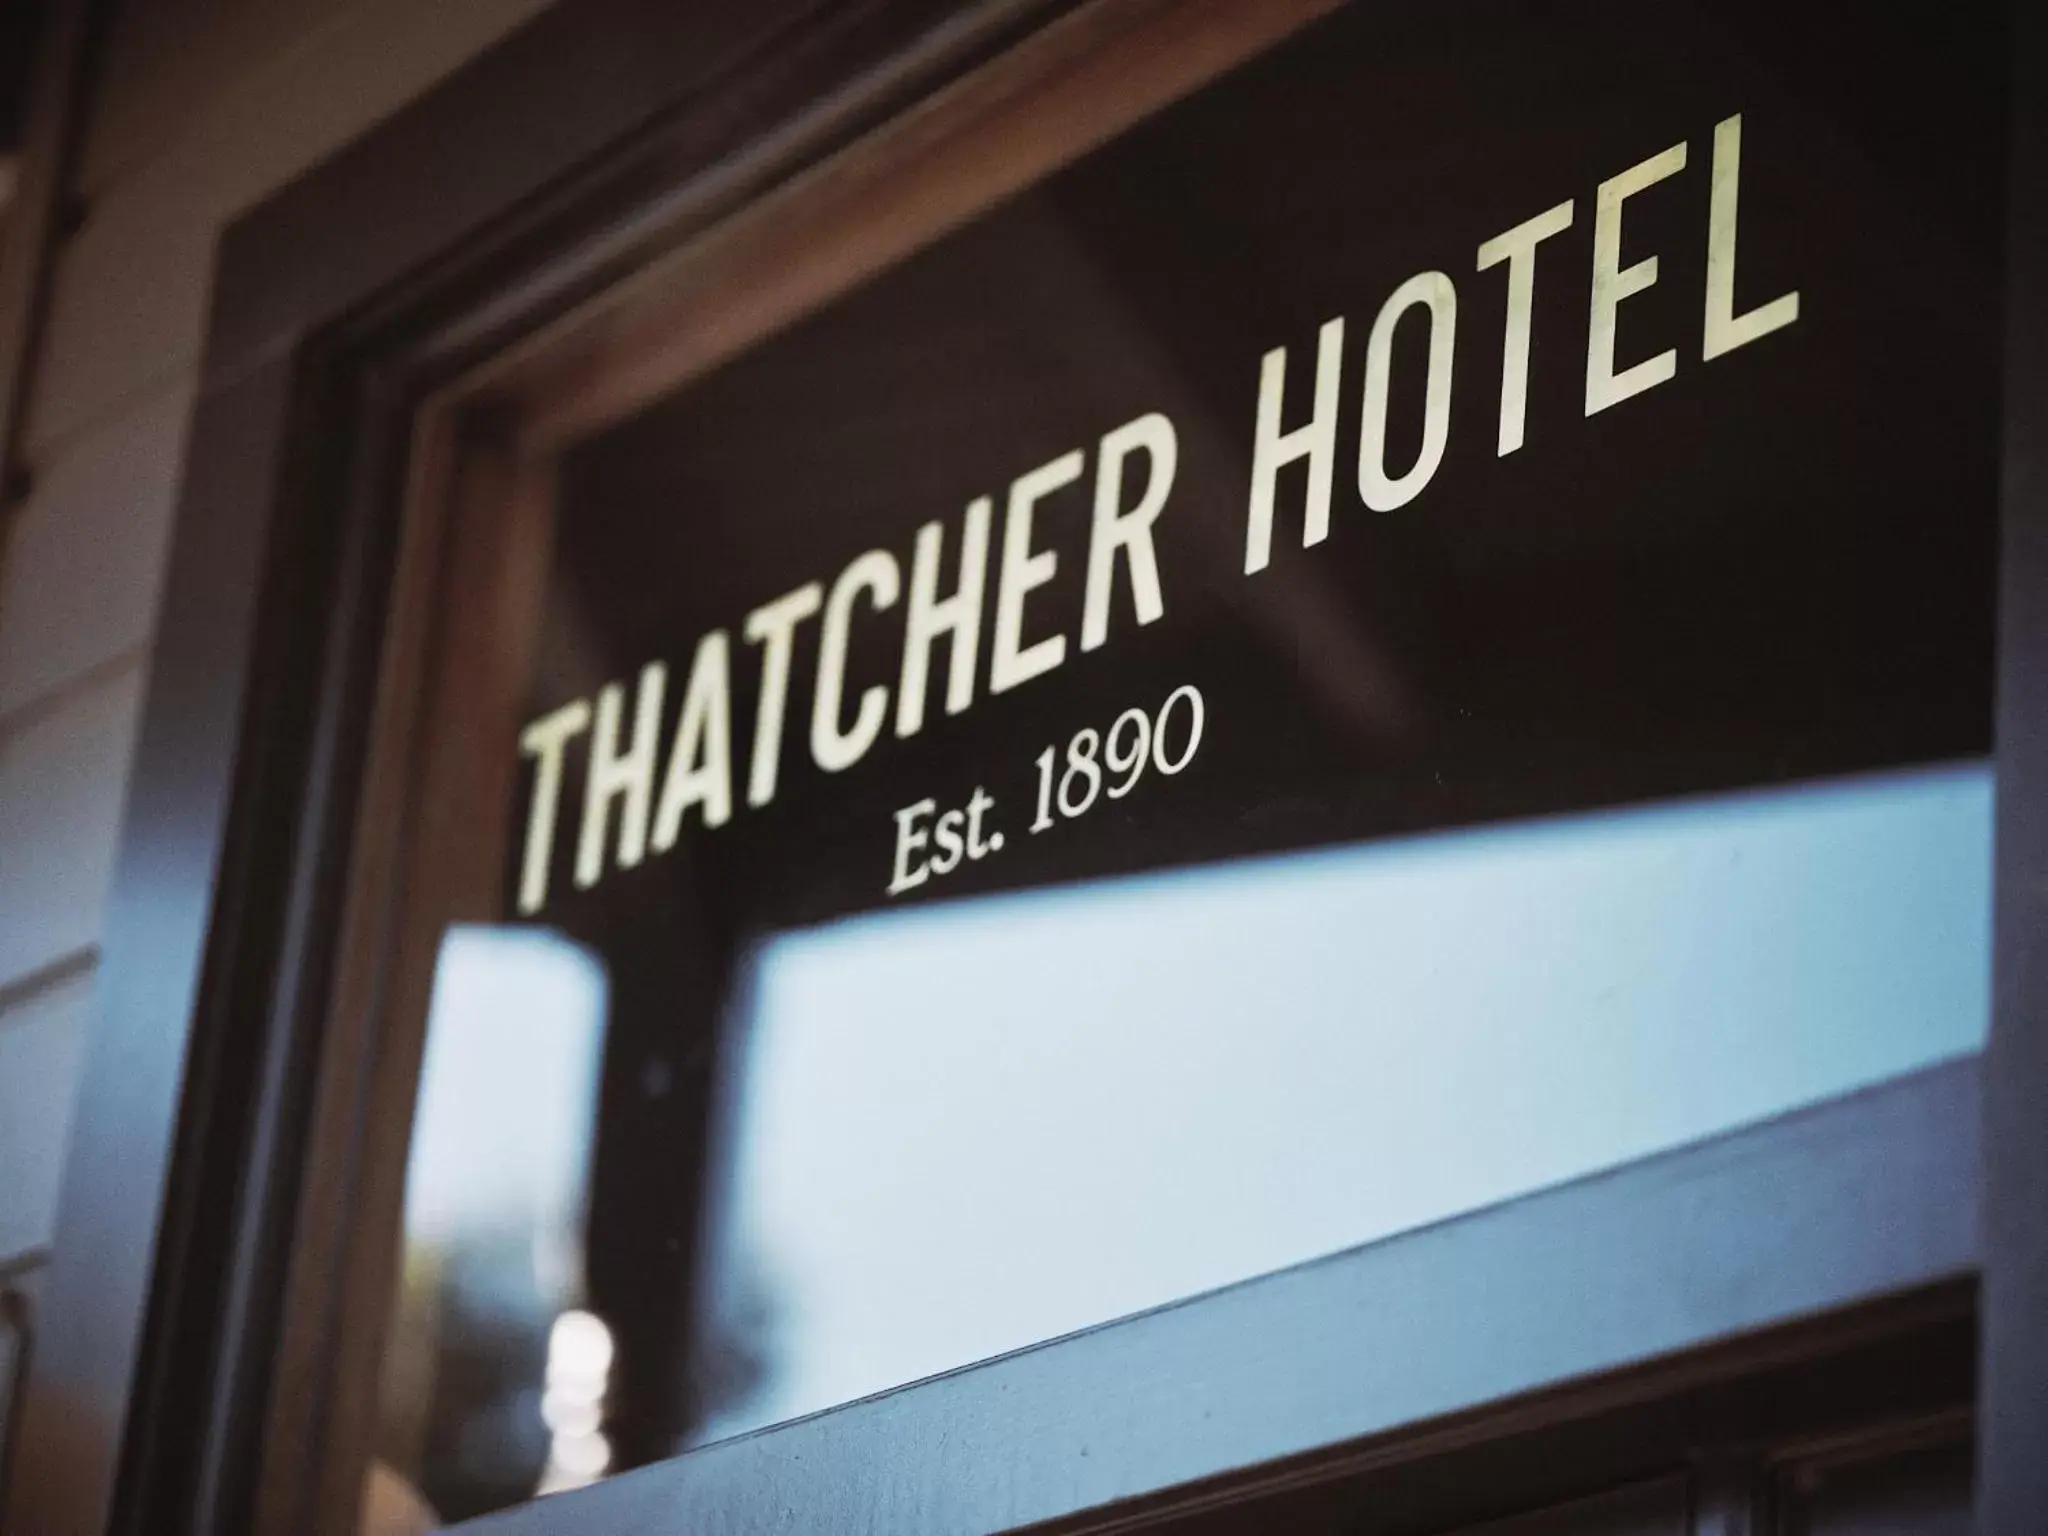 Property building, Logo/Certificate/Sign/Award in Thatcher Hotel